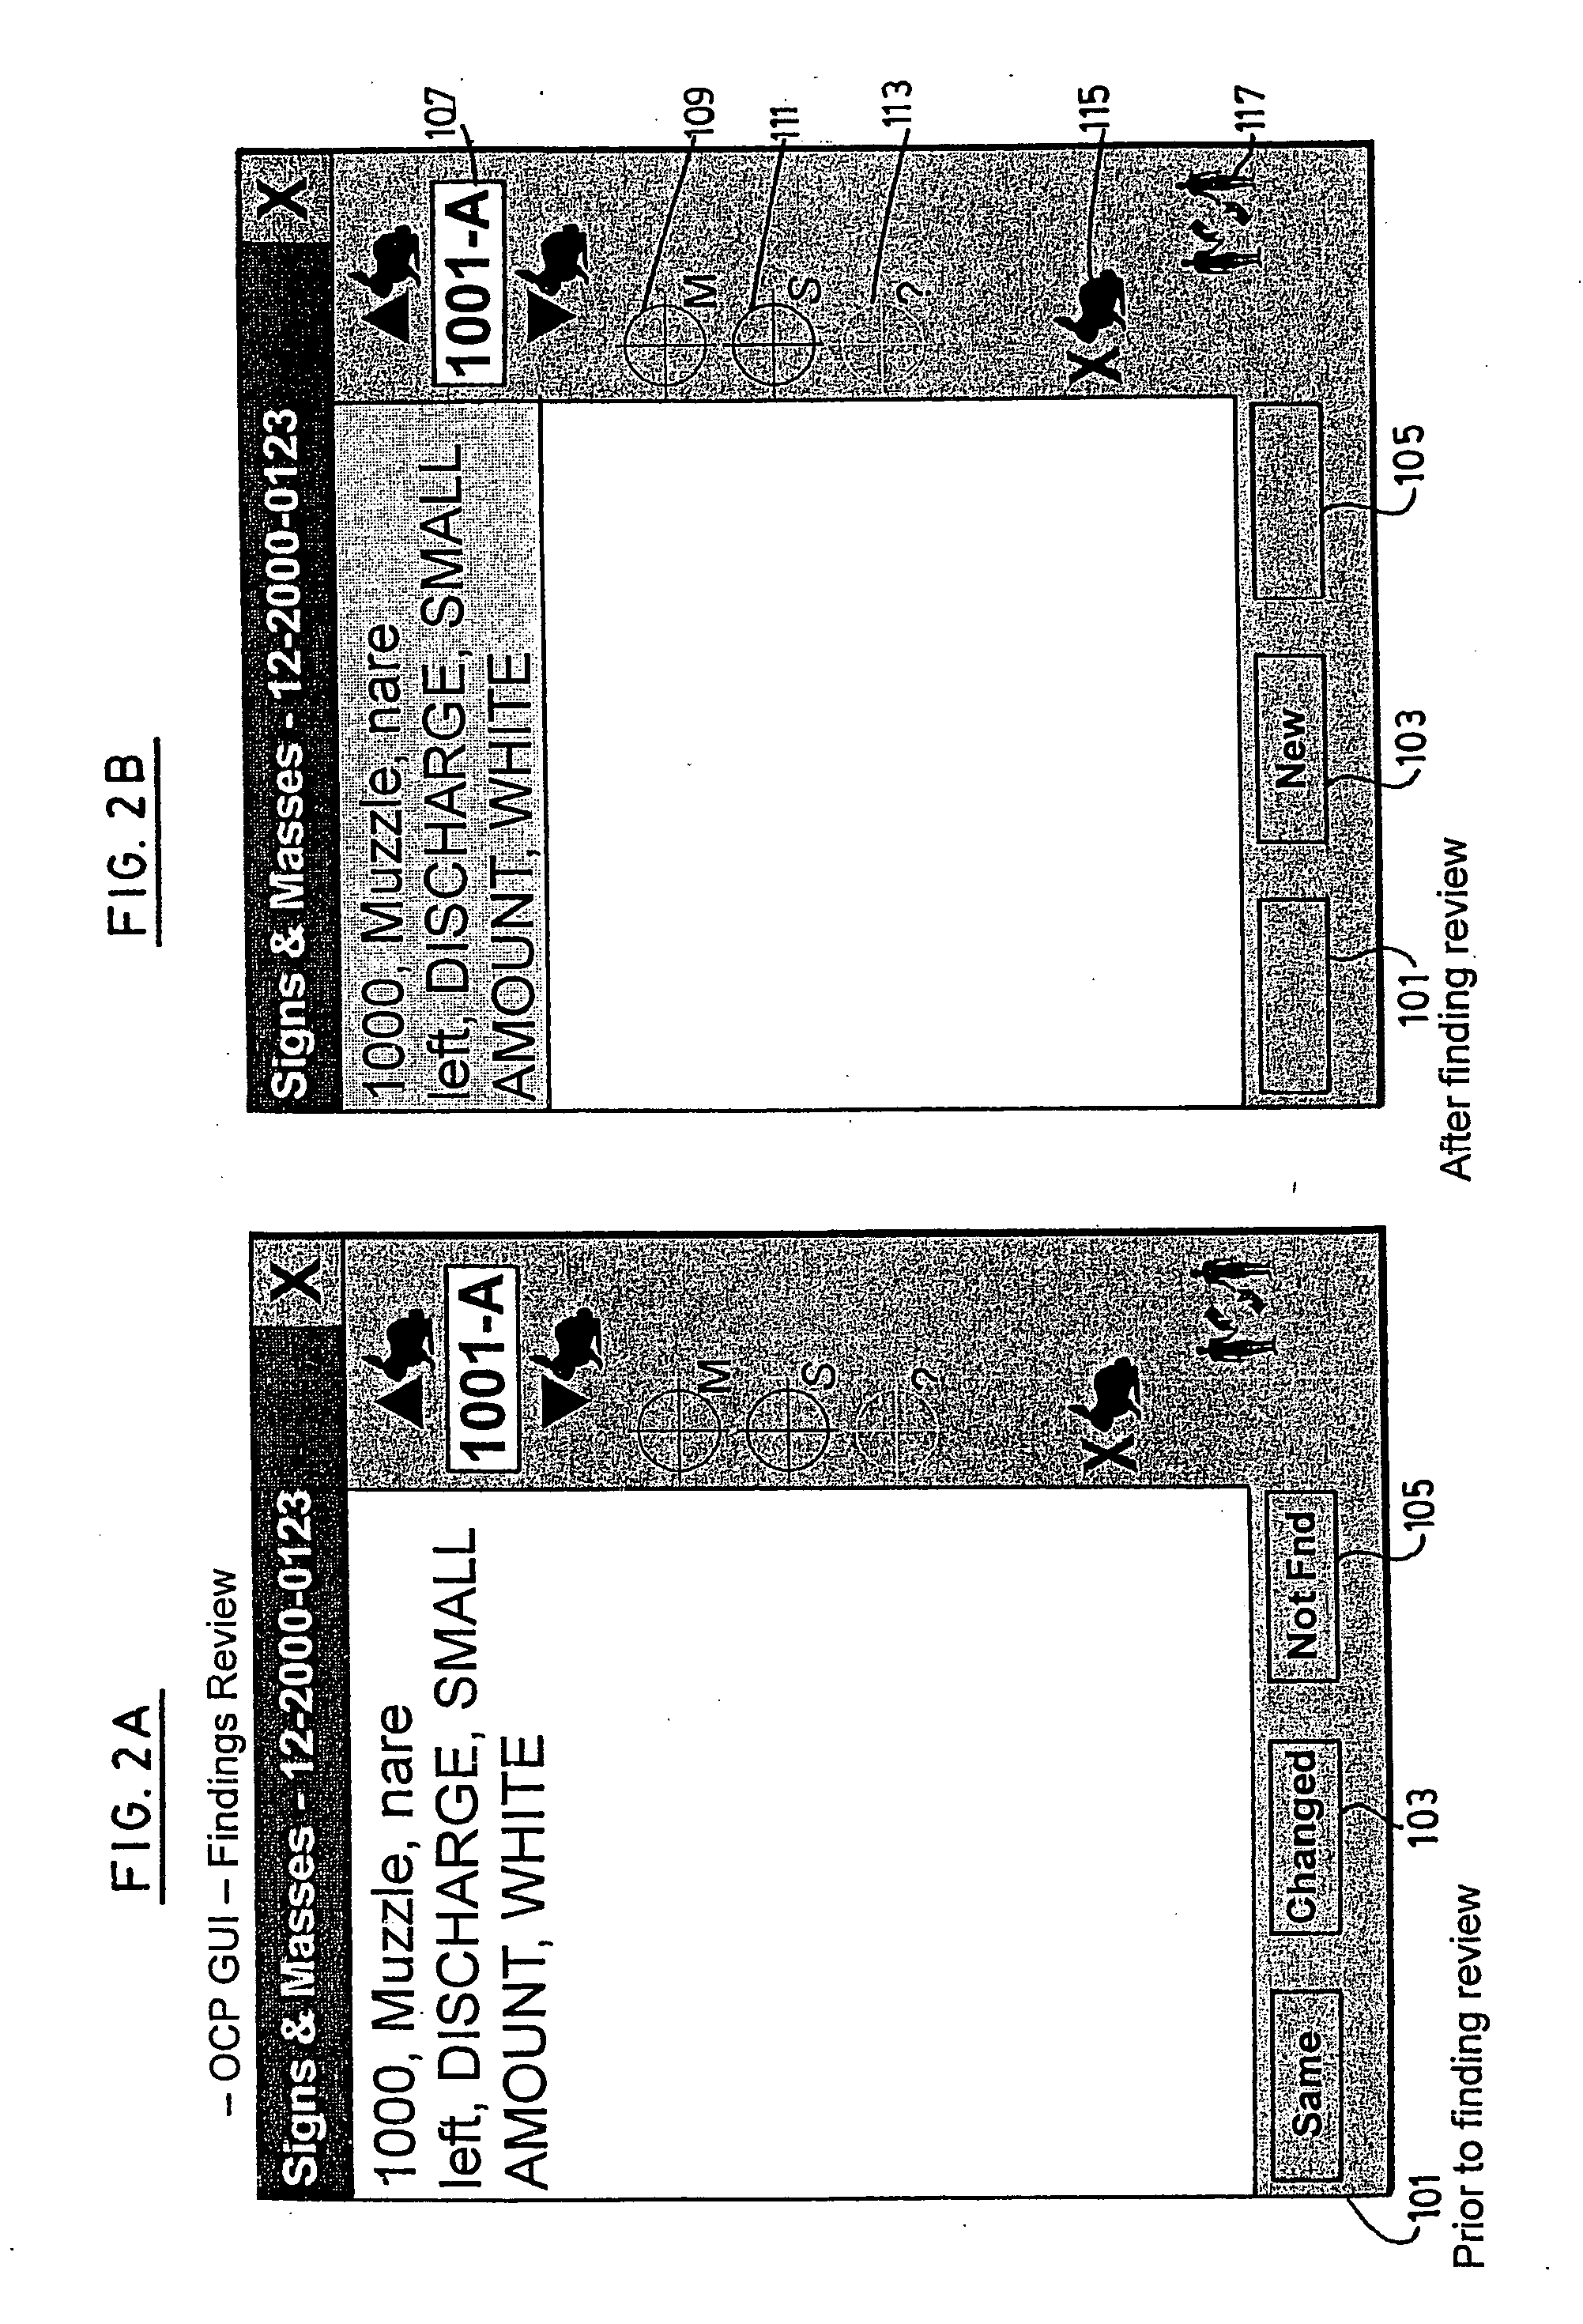 System and method for the collection of observations